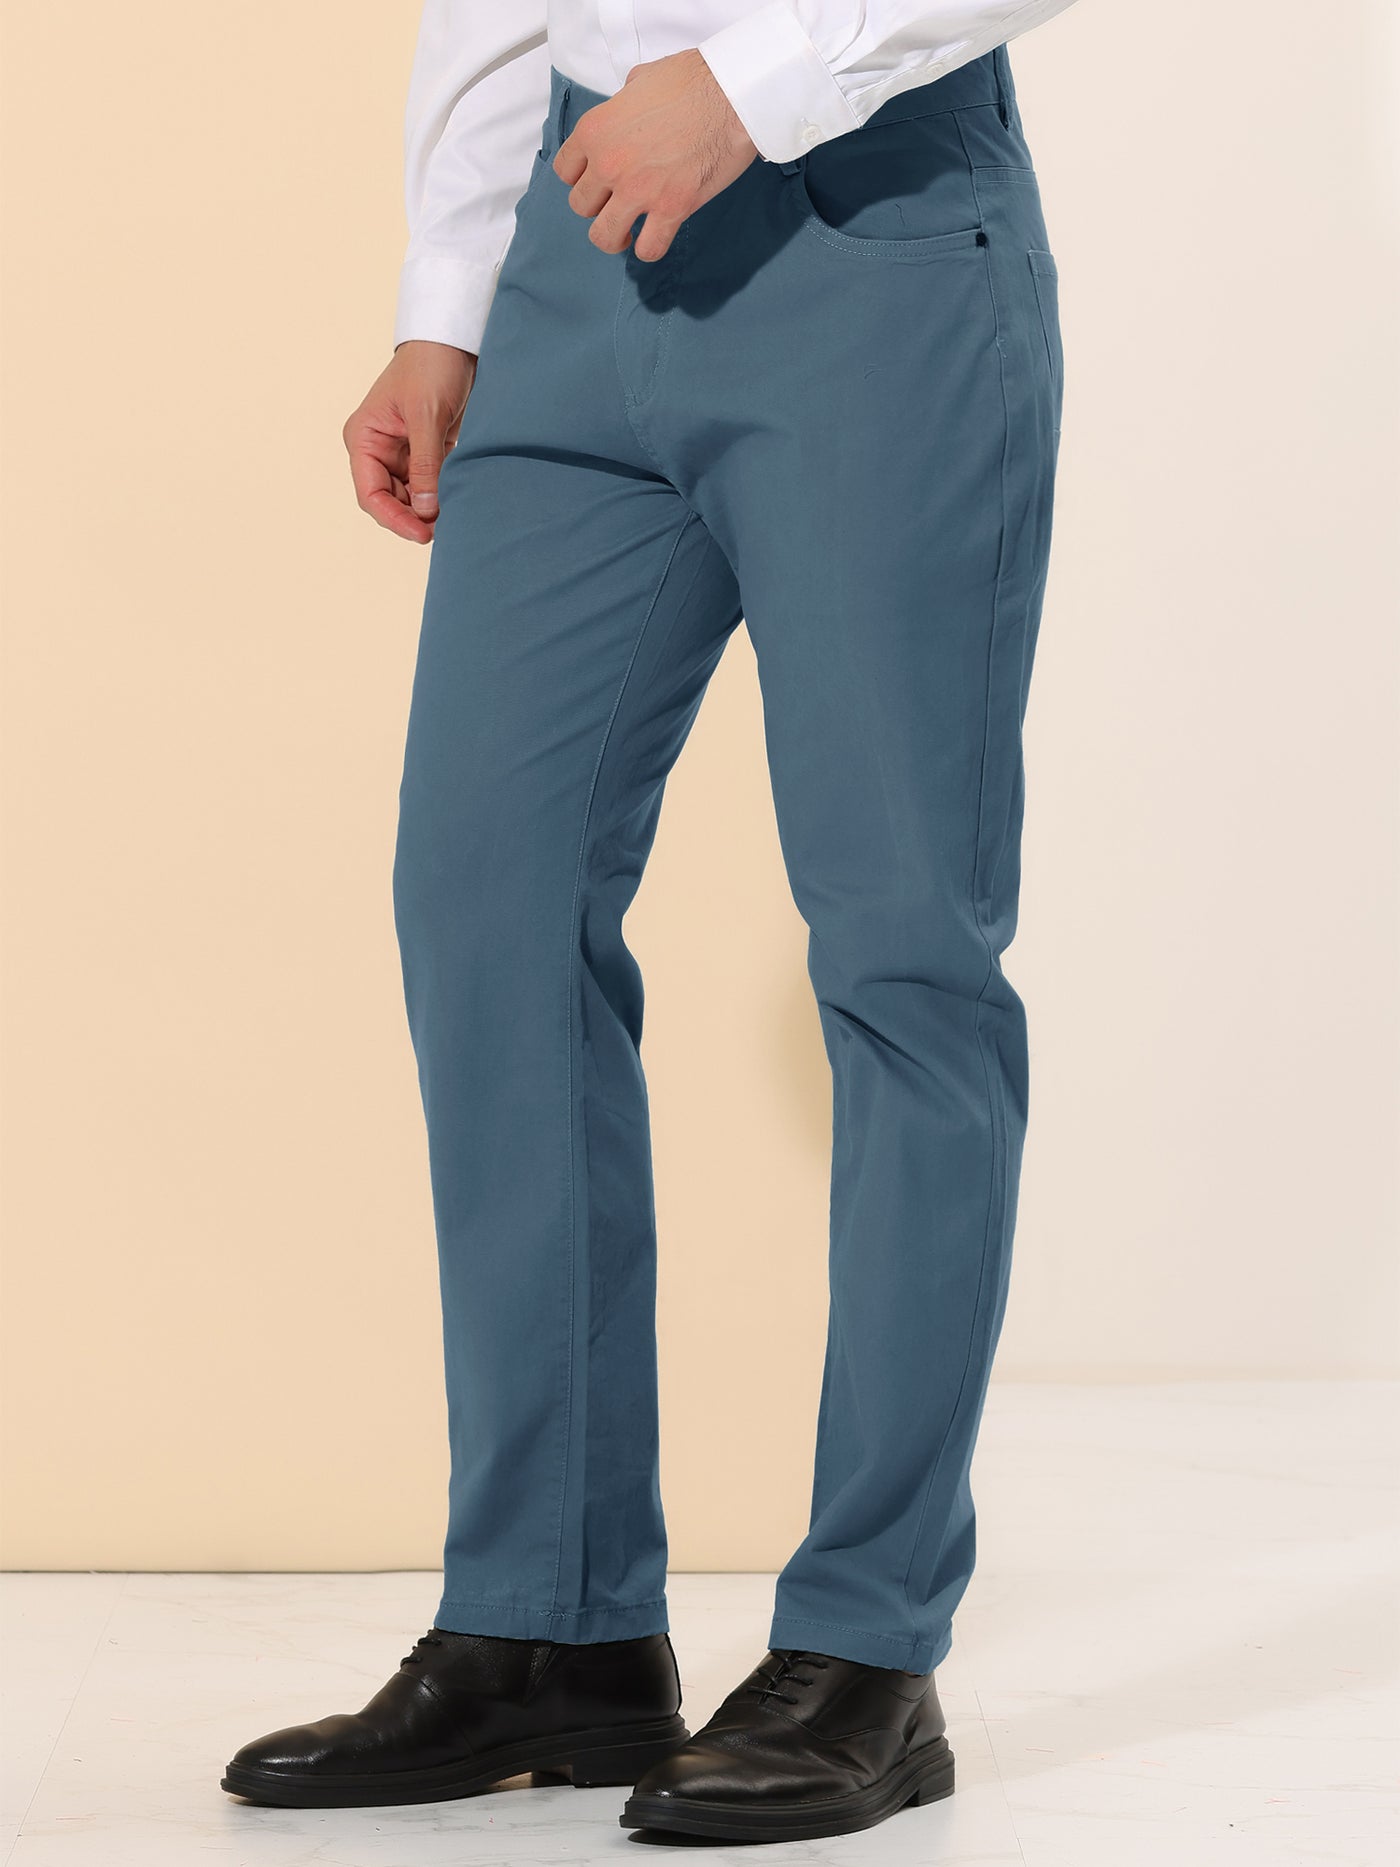 Bublédon Men's Casual Solid Color Slim Fit Flat Front Stretch Chino Dress Pants